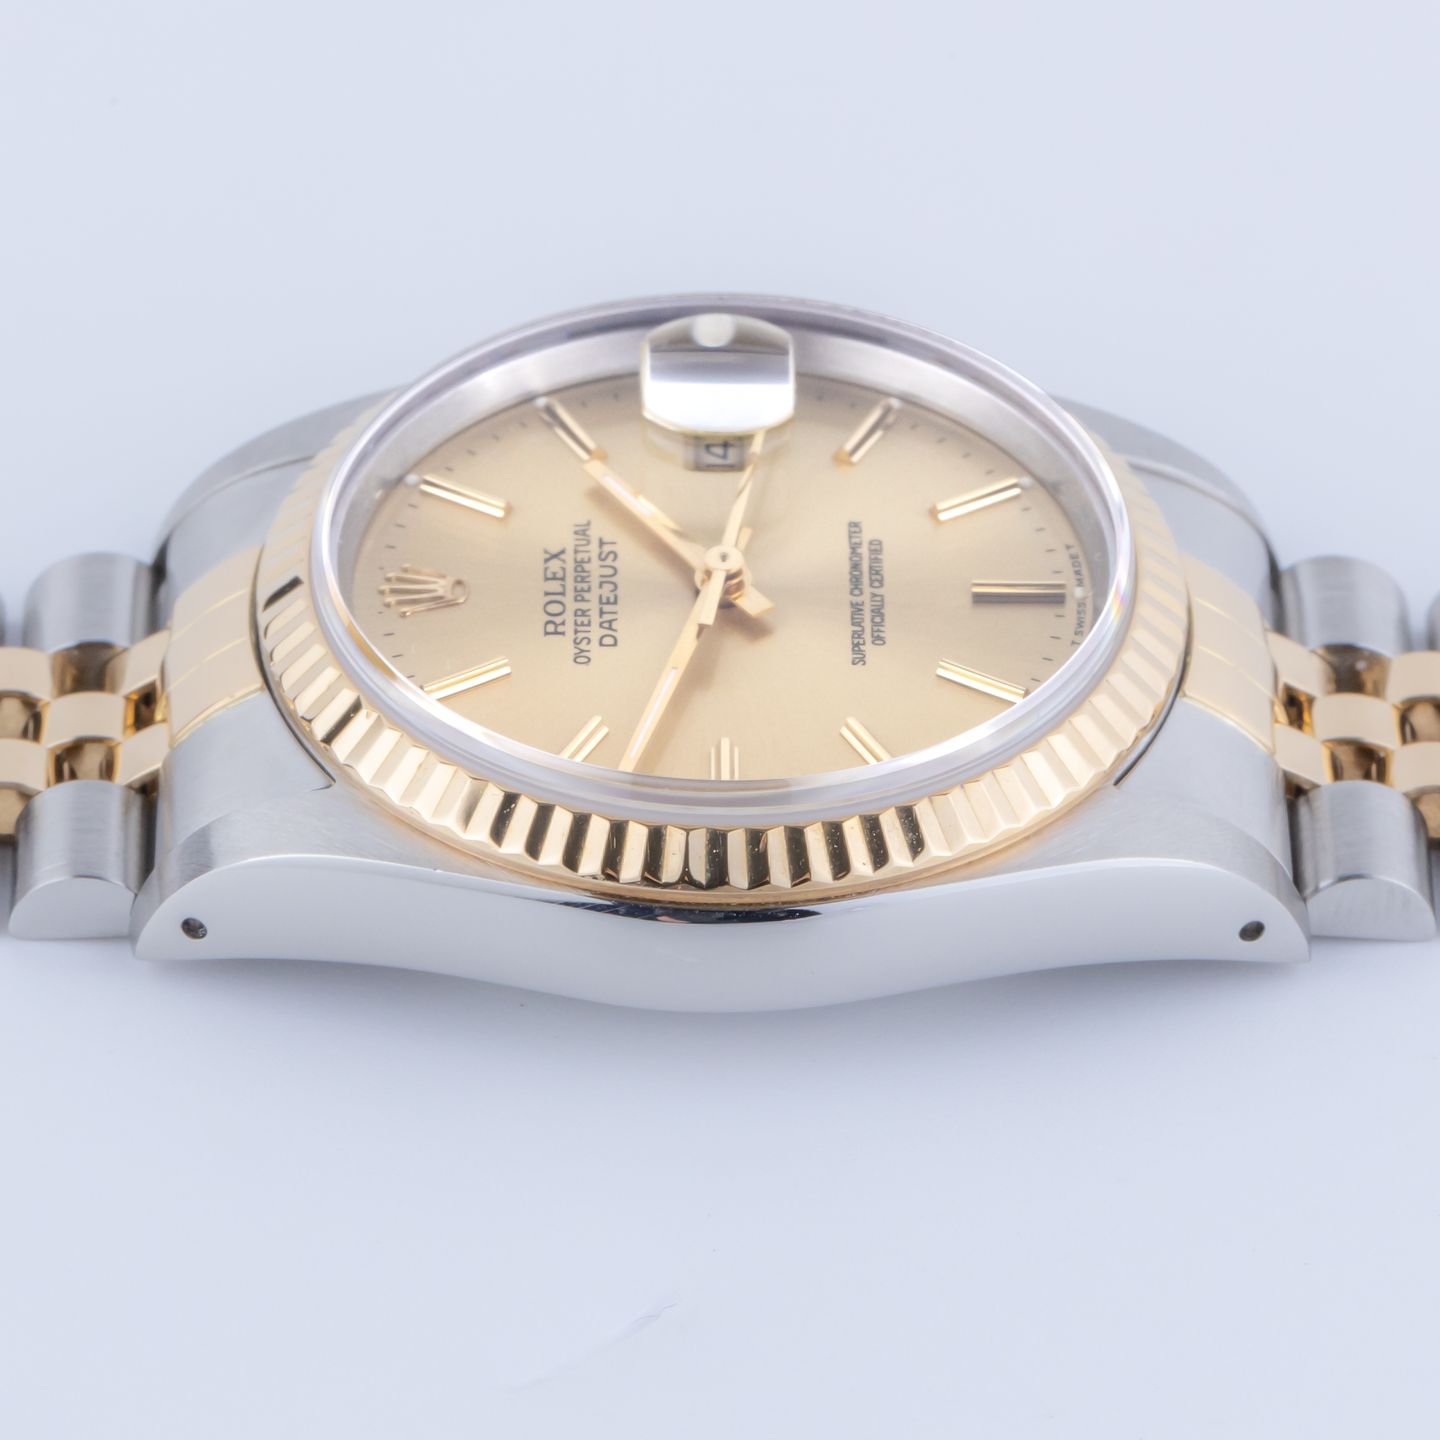 Rolex Datejust 36 16233 (1988) - Champagne dial 36 mm Gold/Steel case (5/7)